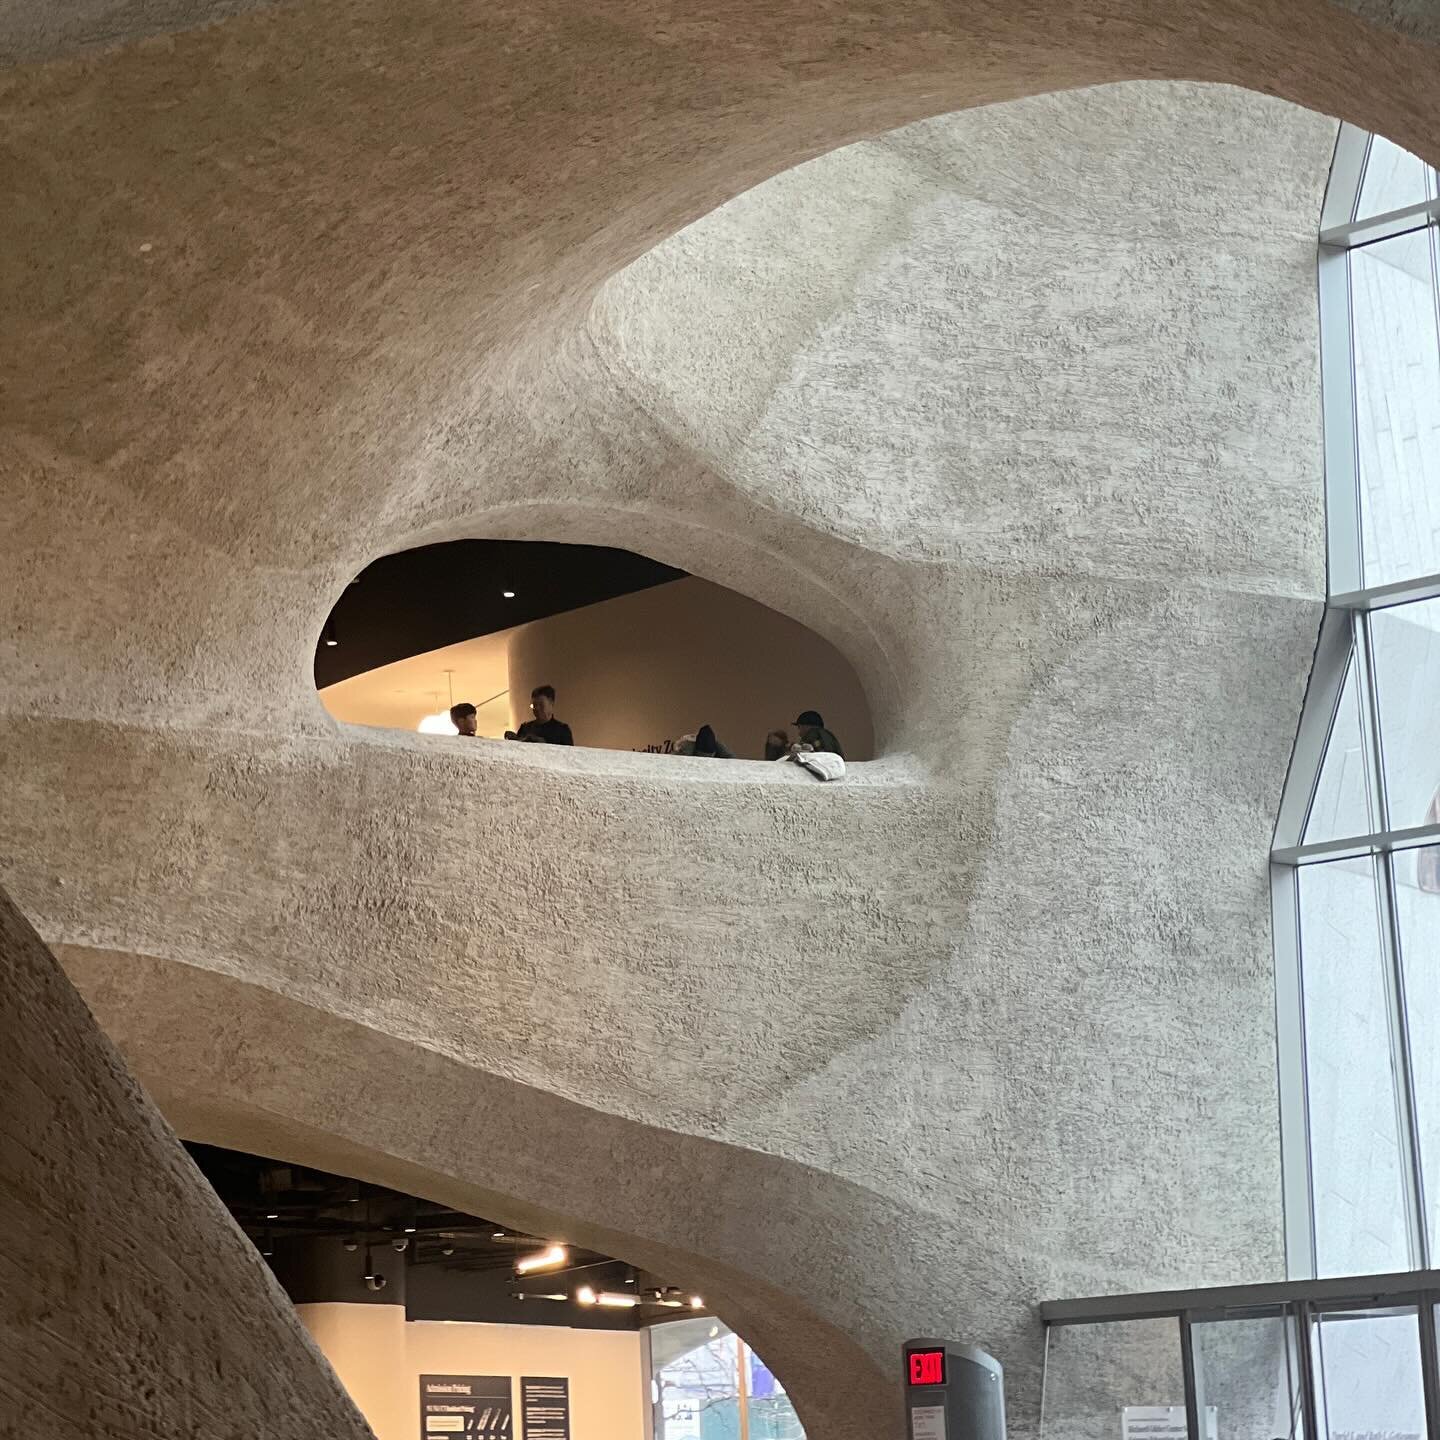 Went to the addition at the Natural History Museum on the Upper West Side to explore this weekend.
#architecture #design #artist #architect #designer #nyc